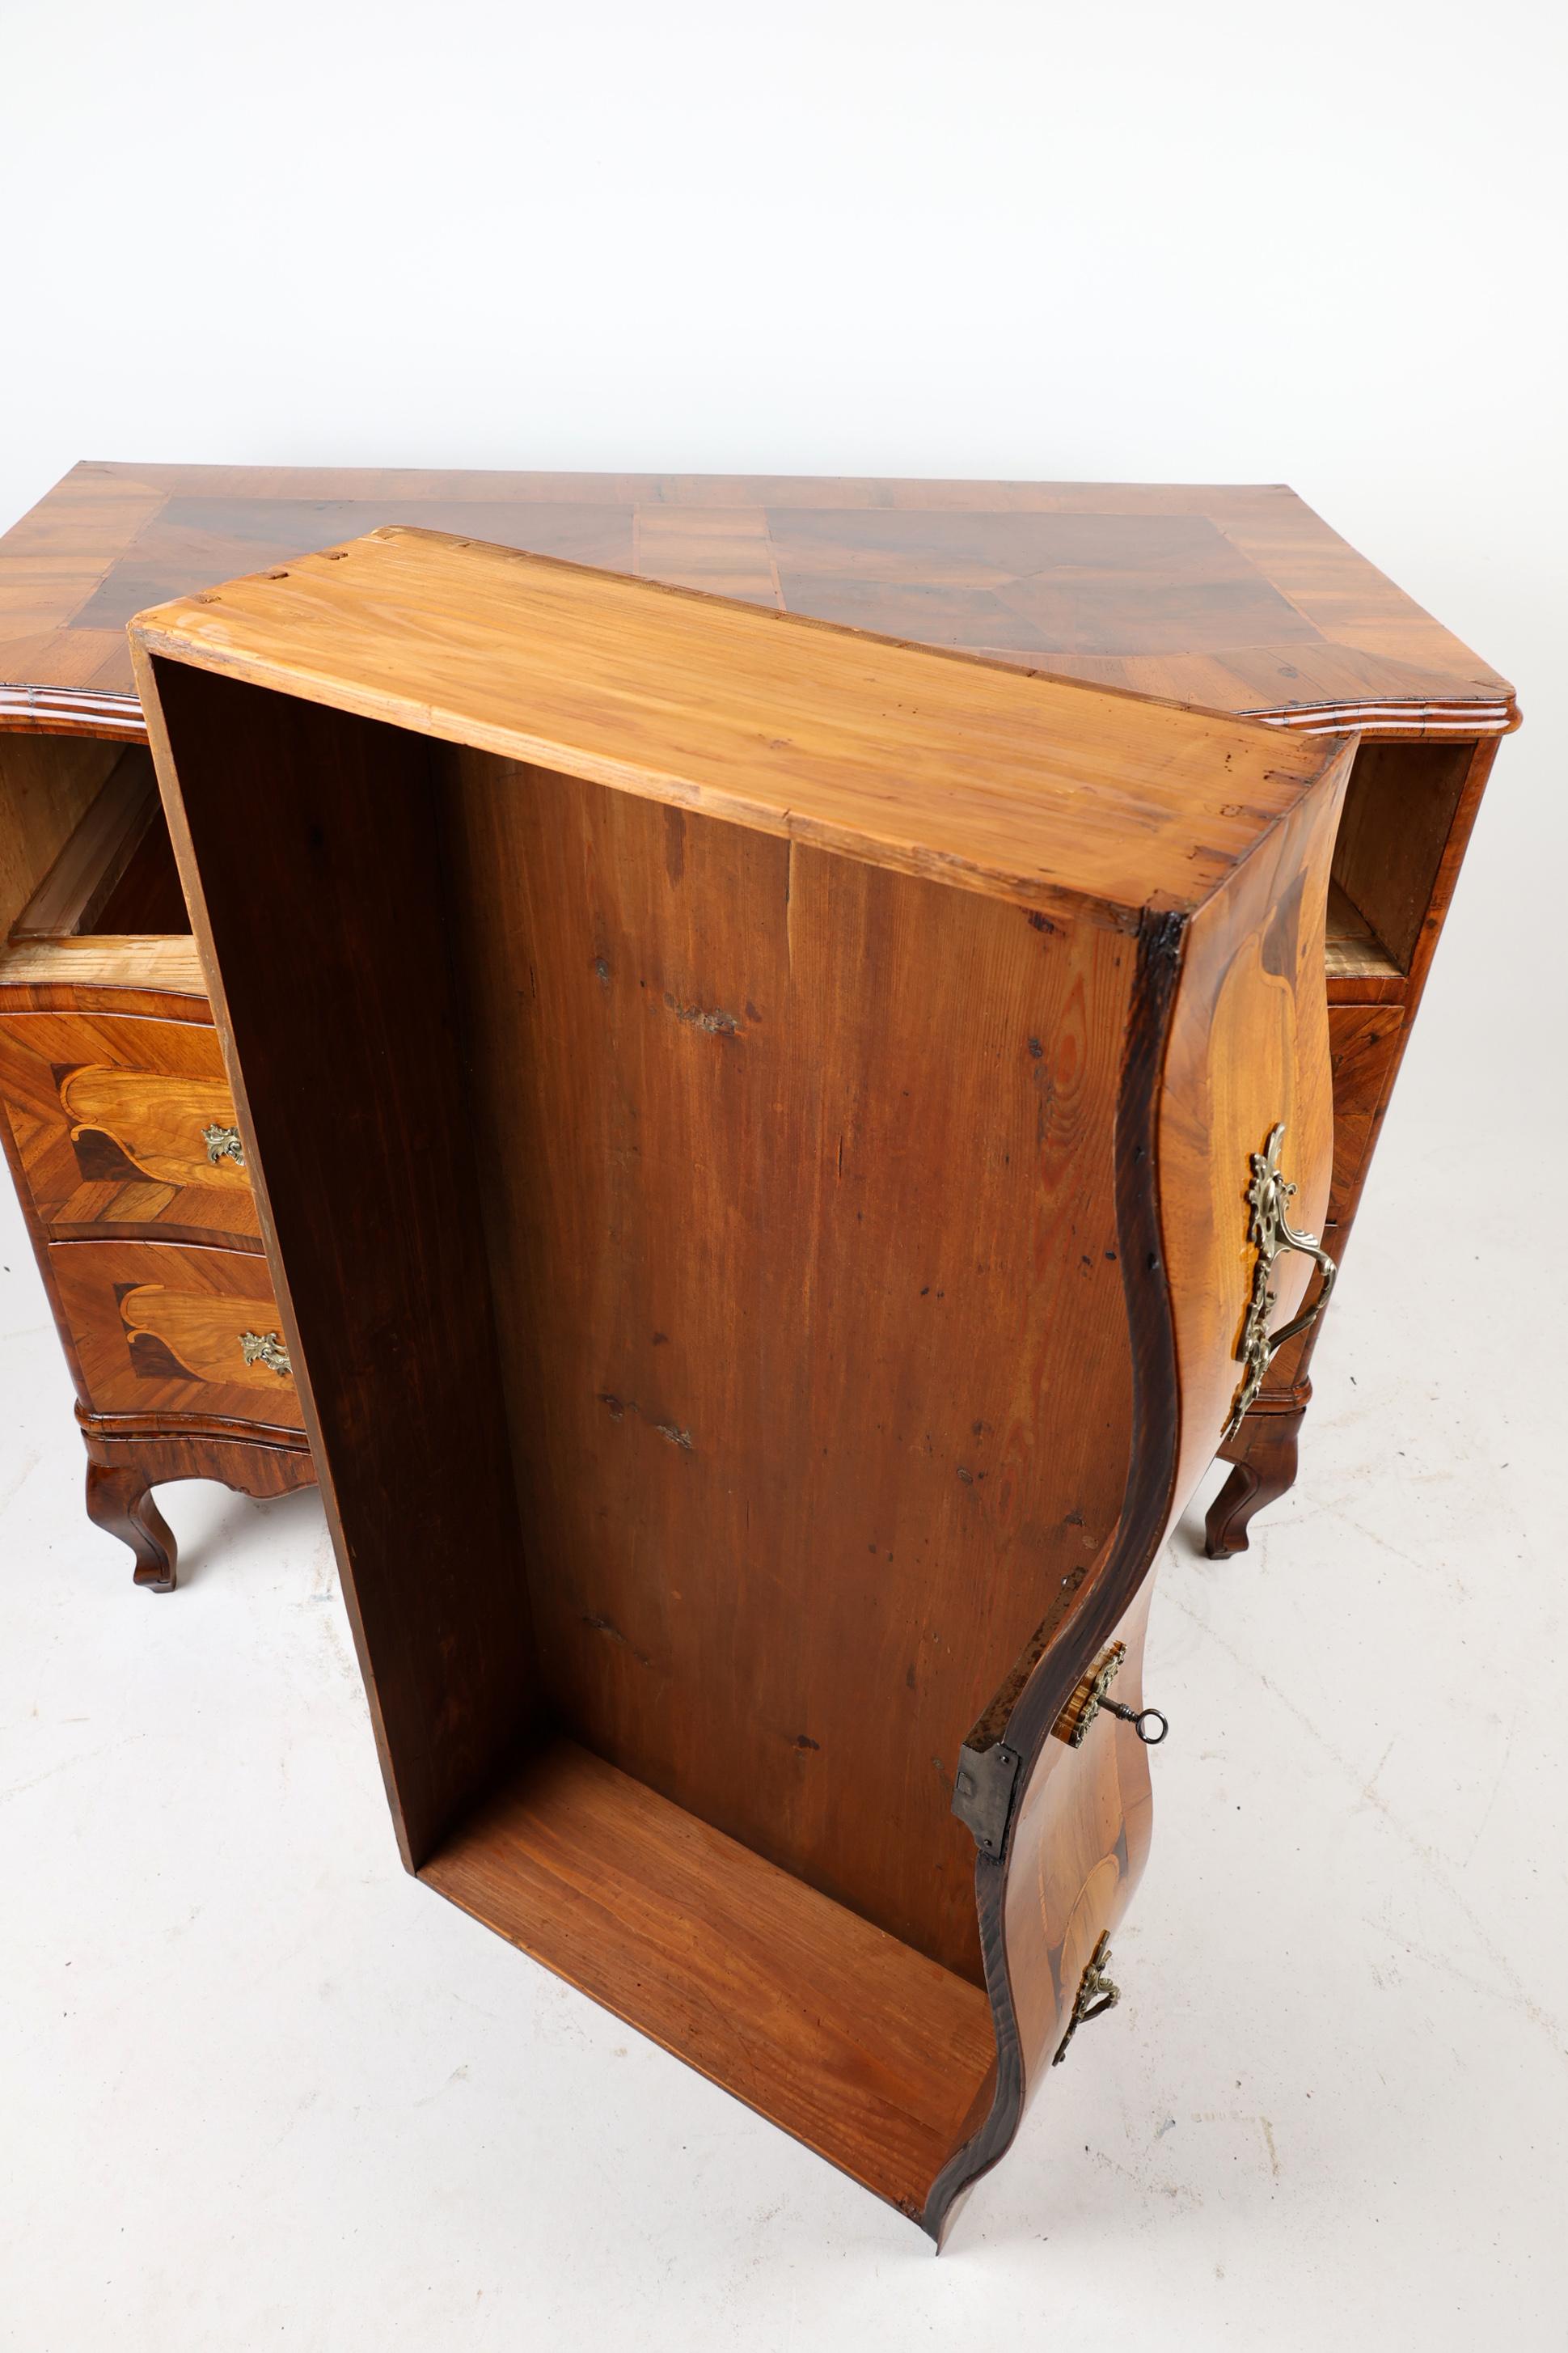 Late 18th Century Baroque Commode with Burl Walnut For Sale 6